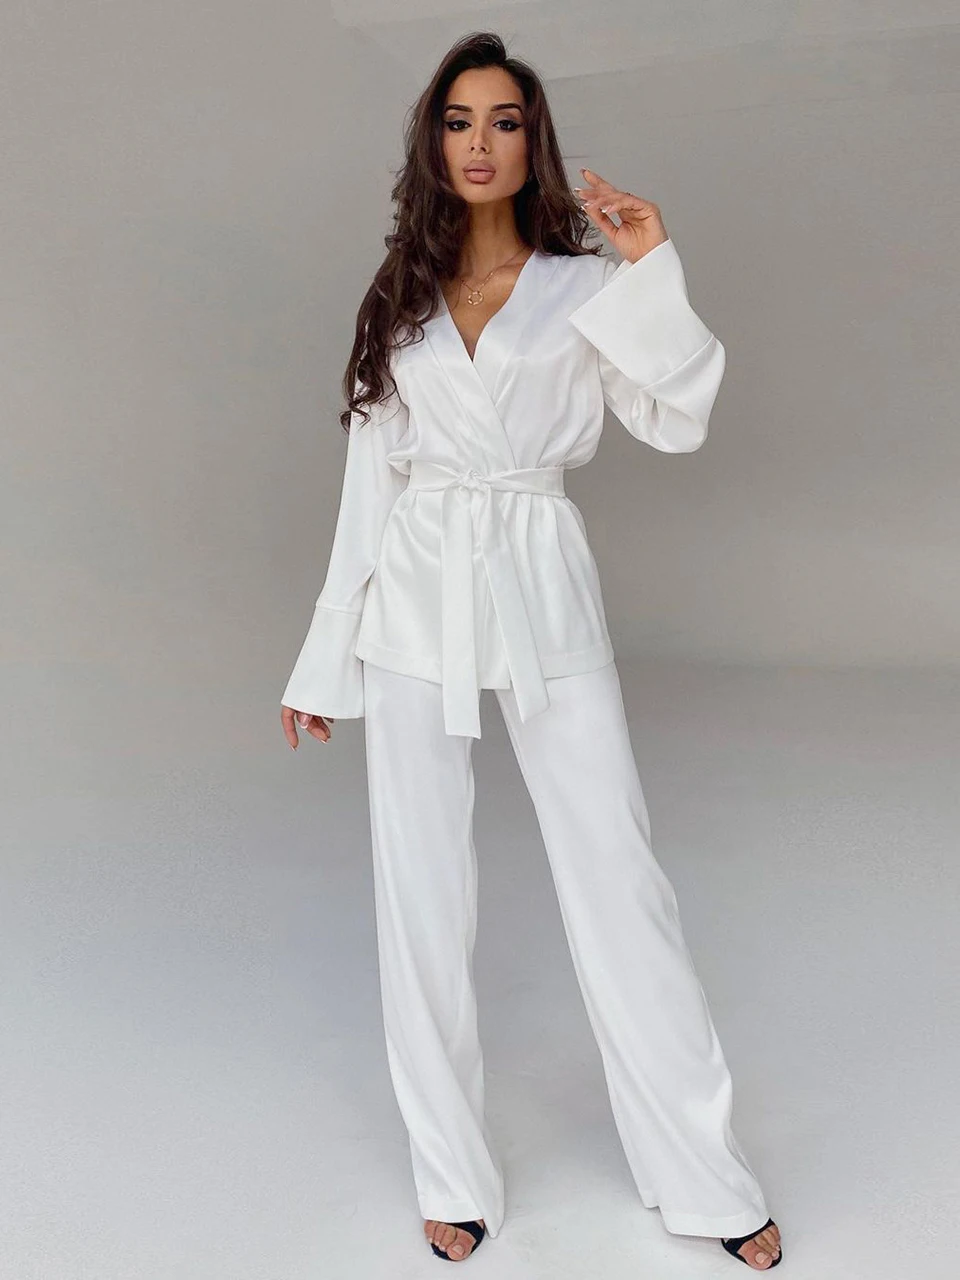 

Solid Color Pajamas For Women Robe Sets Full Sleeves Women's Home Clothes Trouser Suits Satin Nightgowns Spring 2022 Loungewear